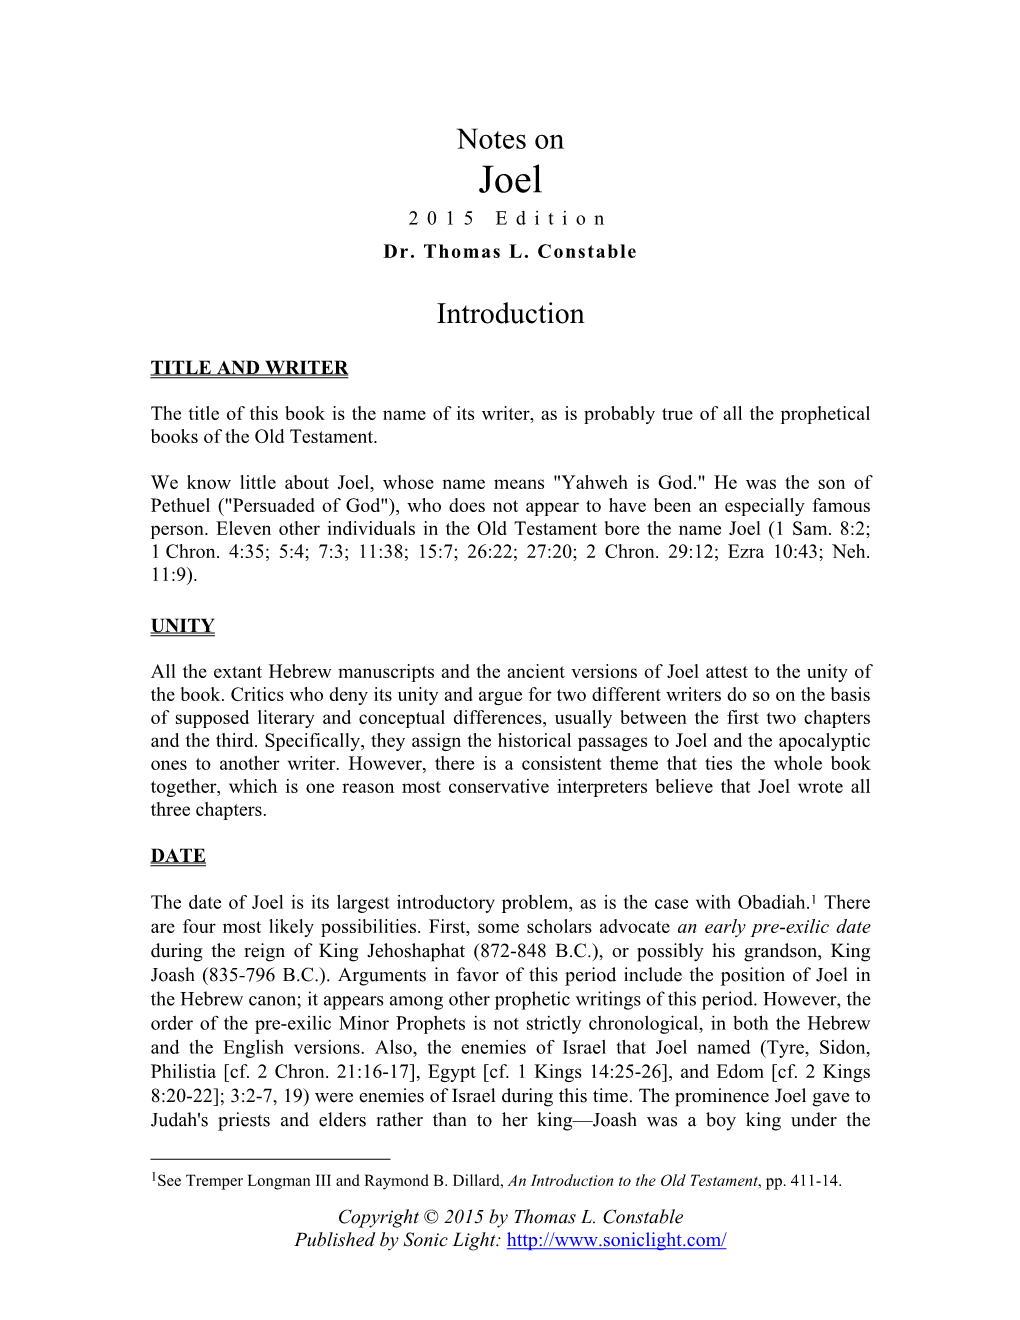 Notes on Joel 2015 Edition Dr